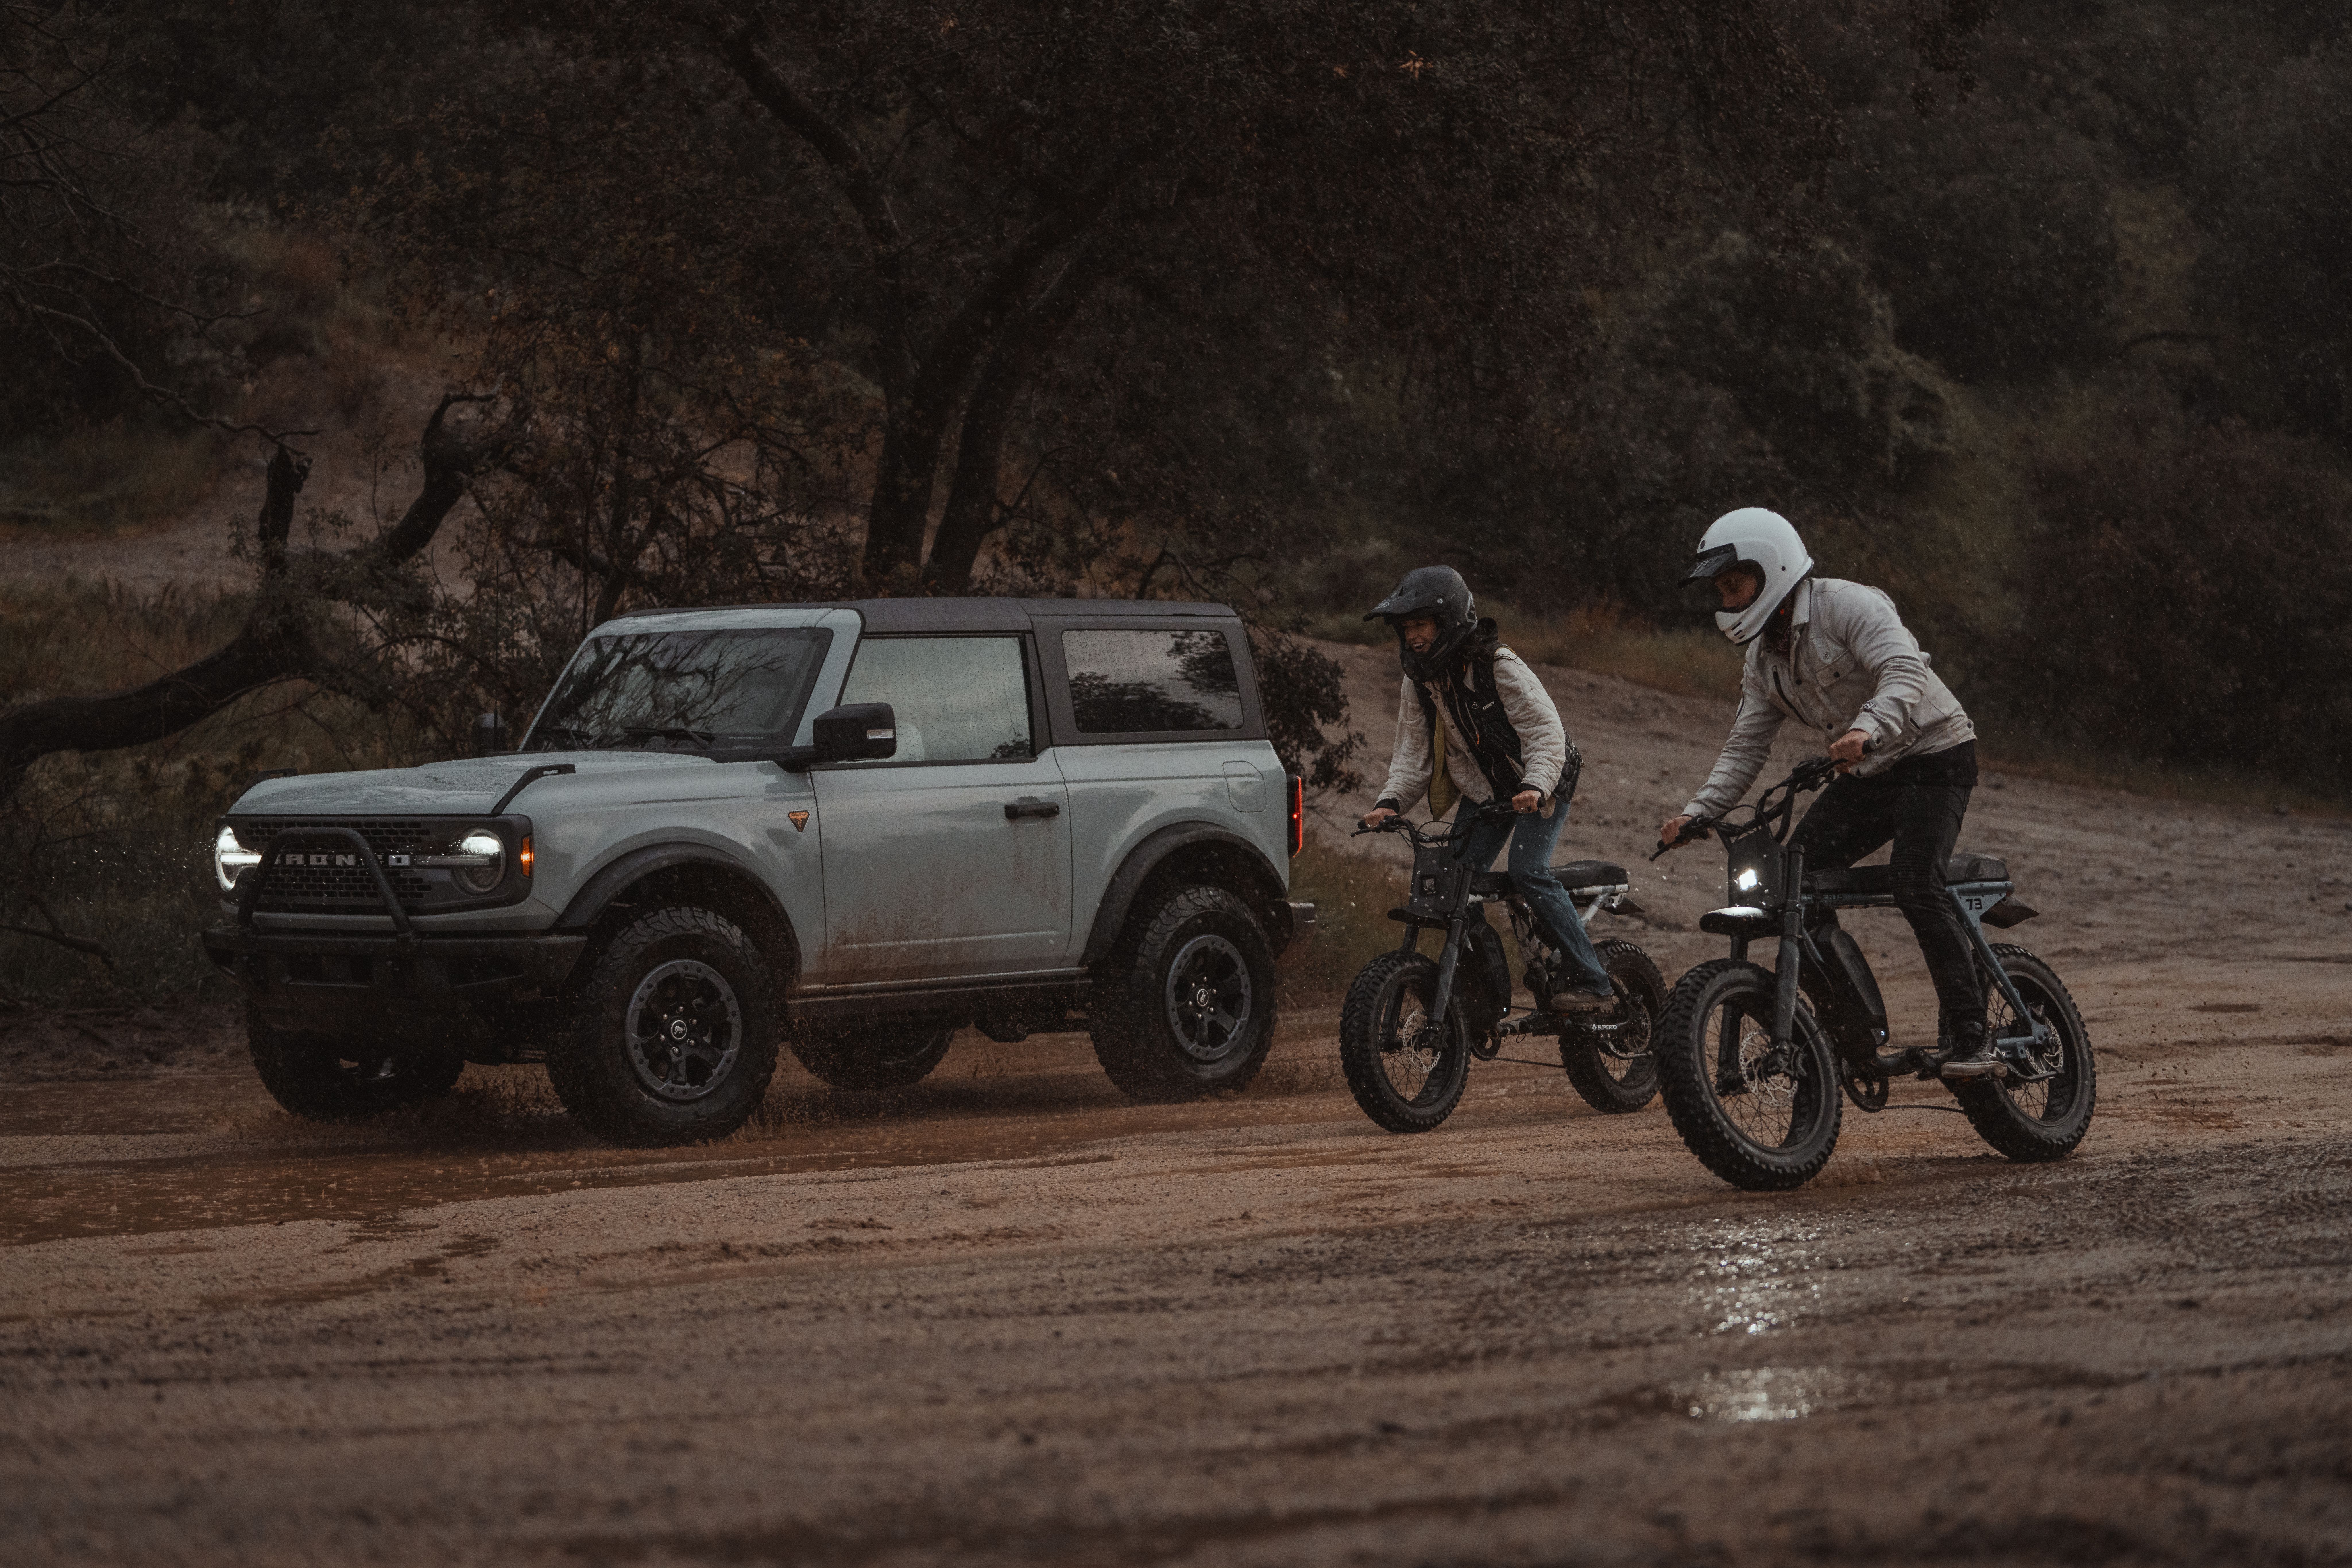 Electric Bikes and a SUV exploring in the mud